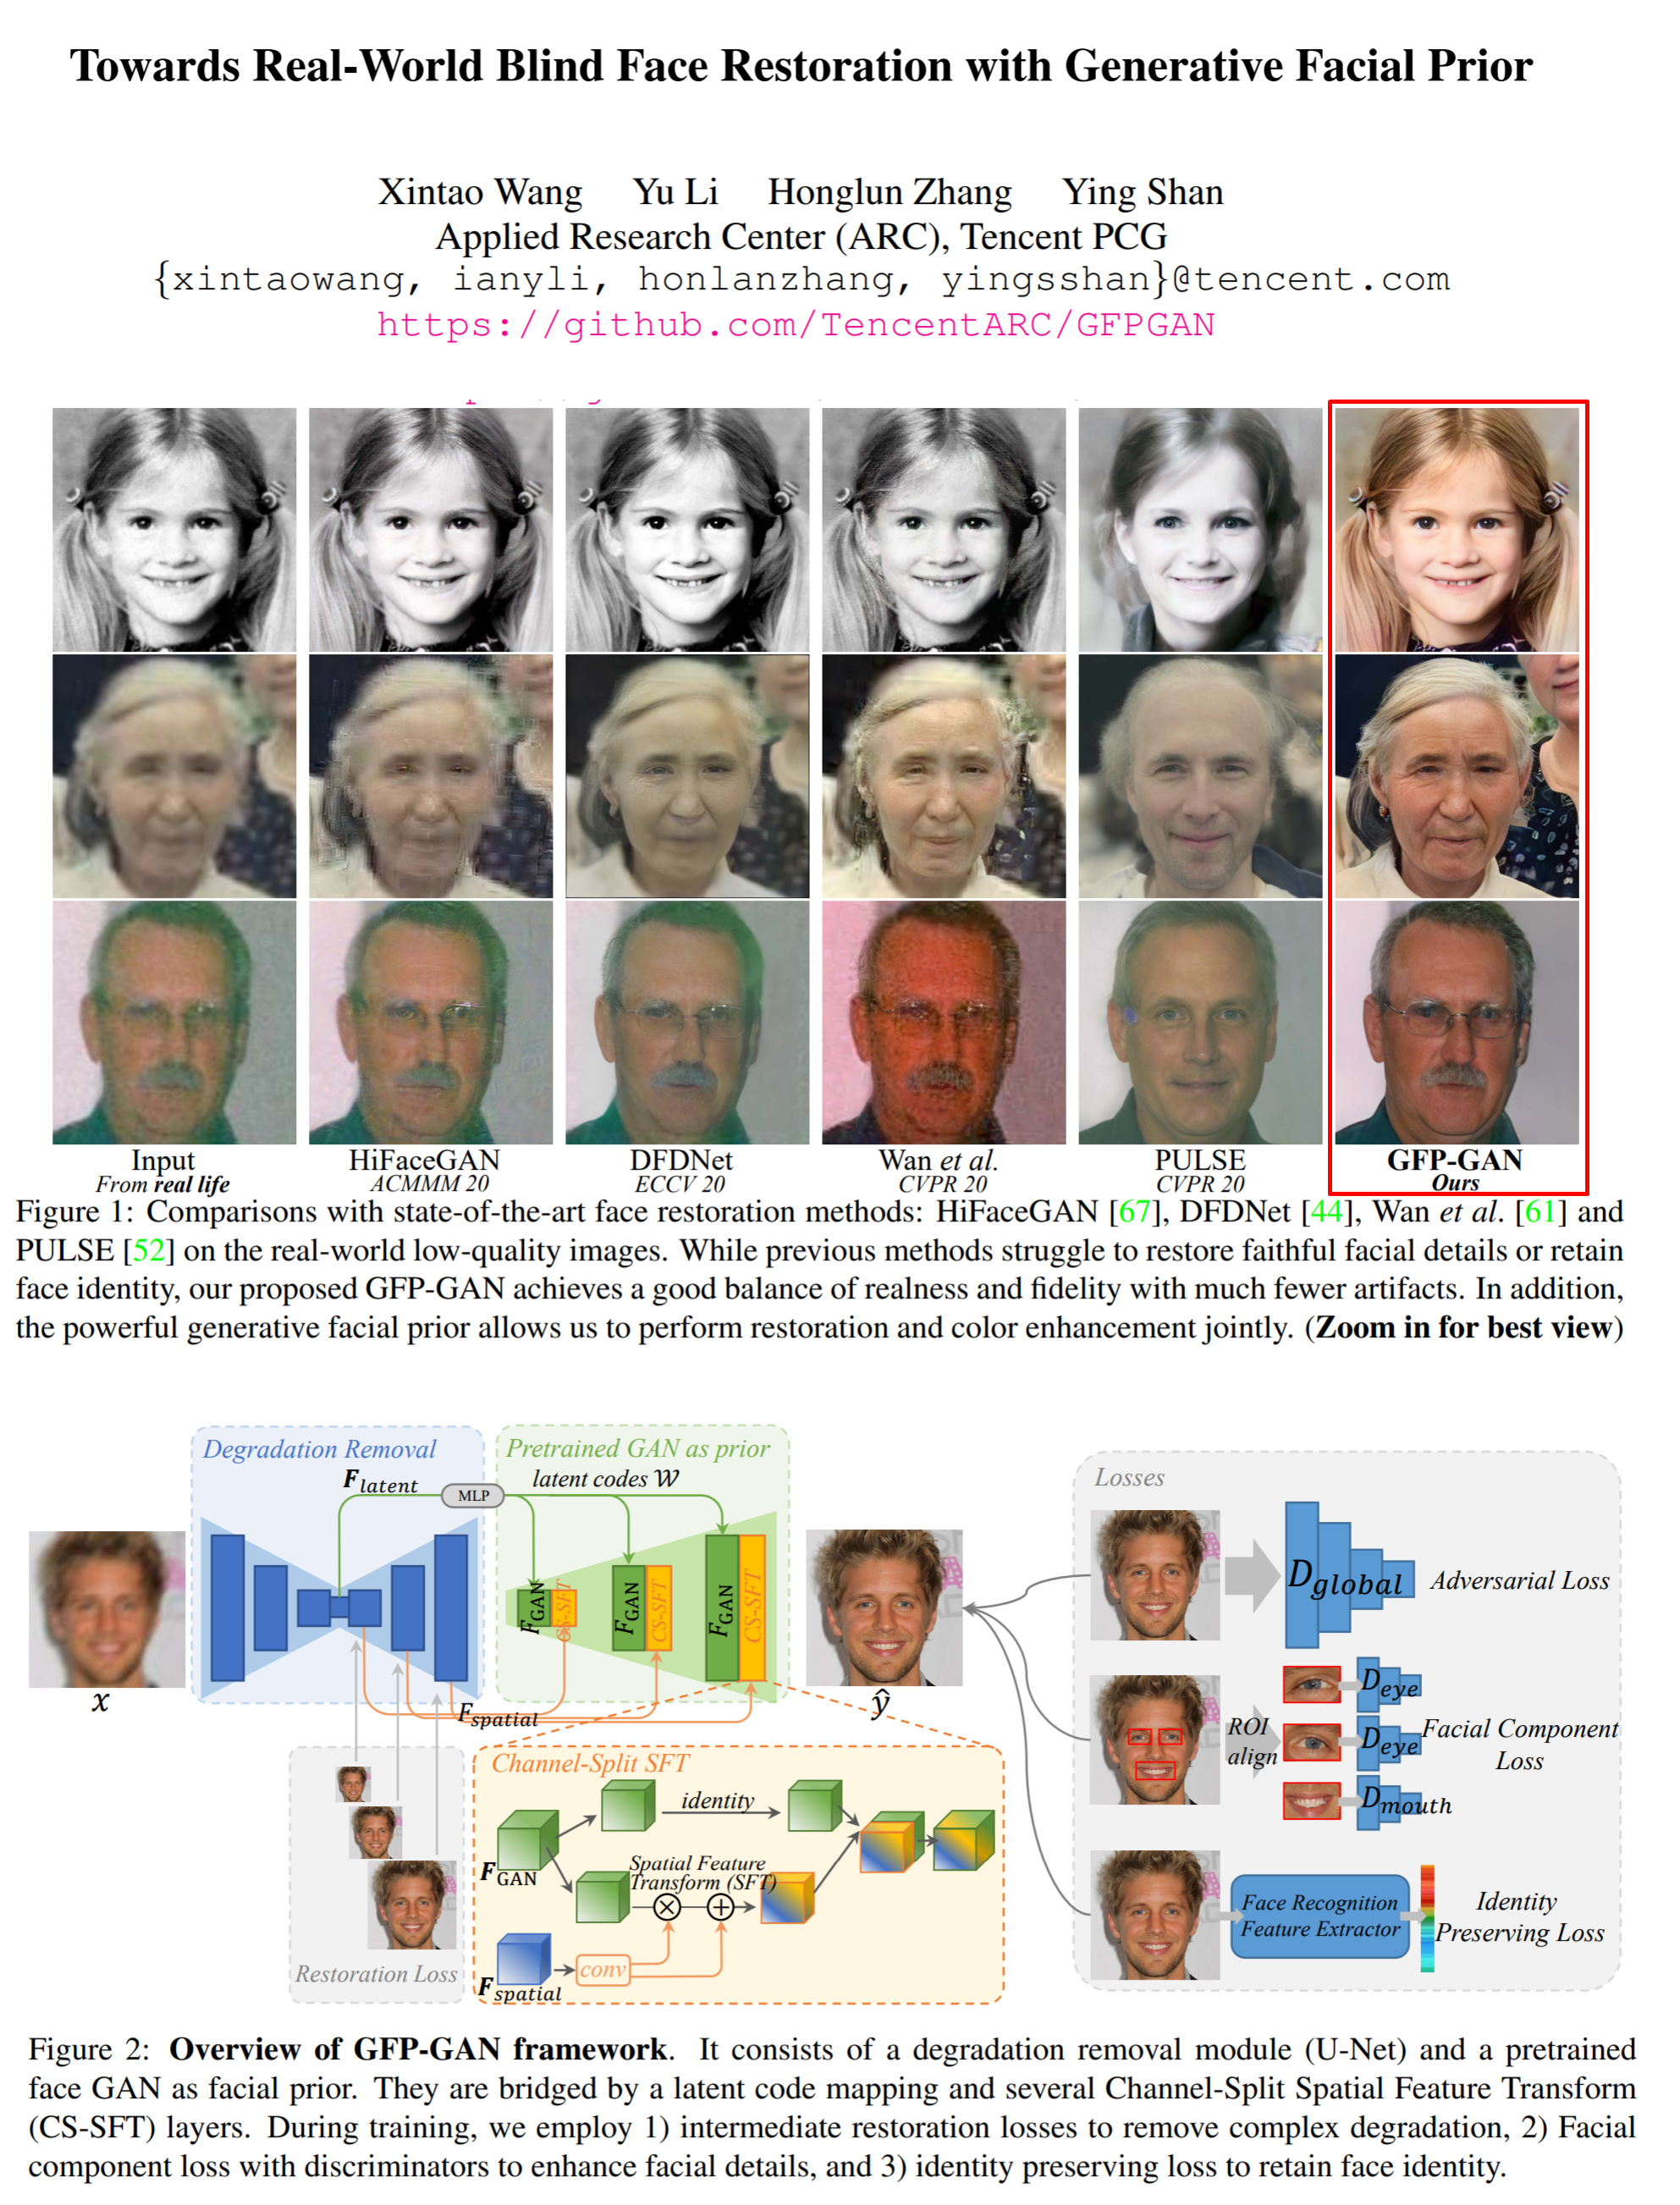 Towards Real-World Blind Face Restoration with Generative Facial Prior by Xintao Wang et al. explained in 10 minutes.